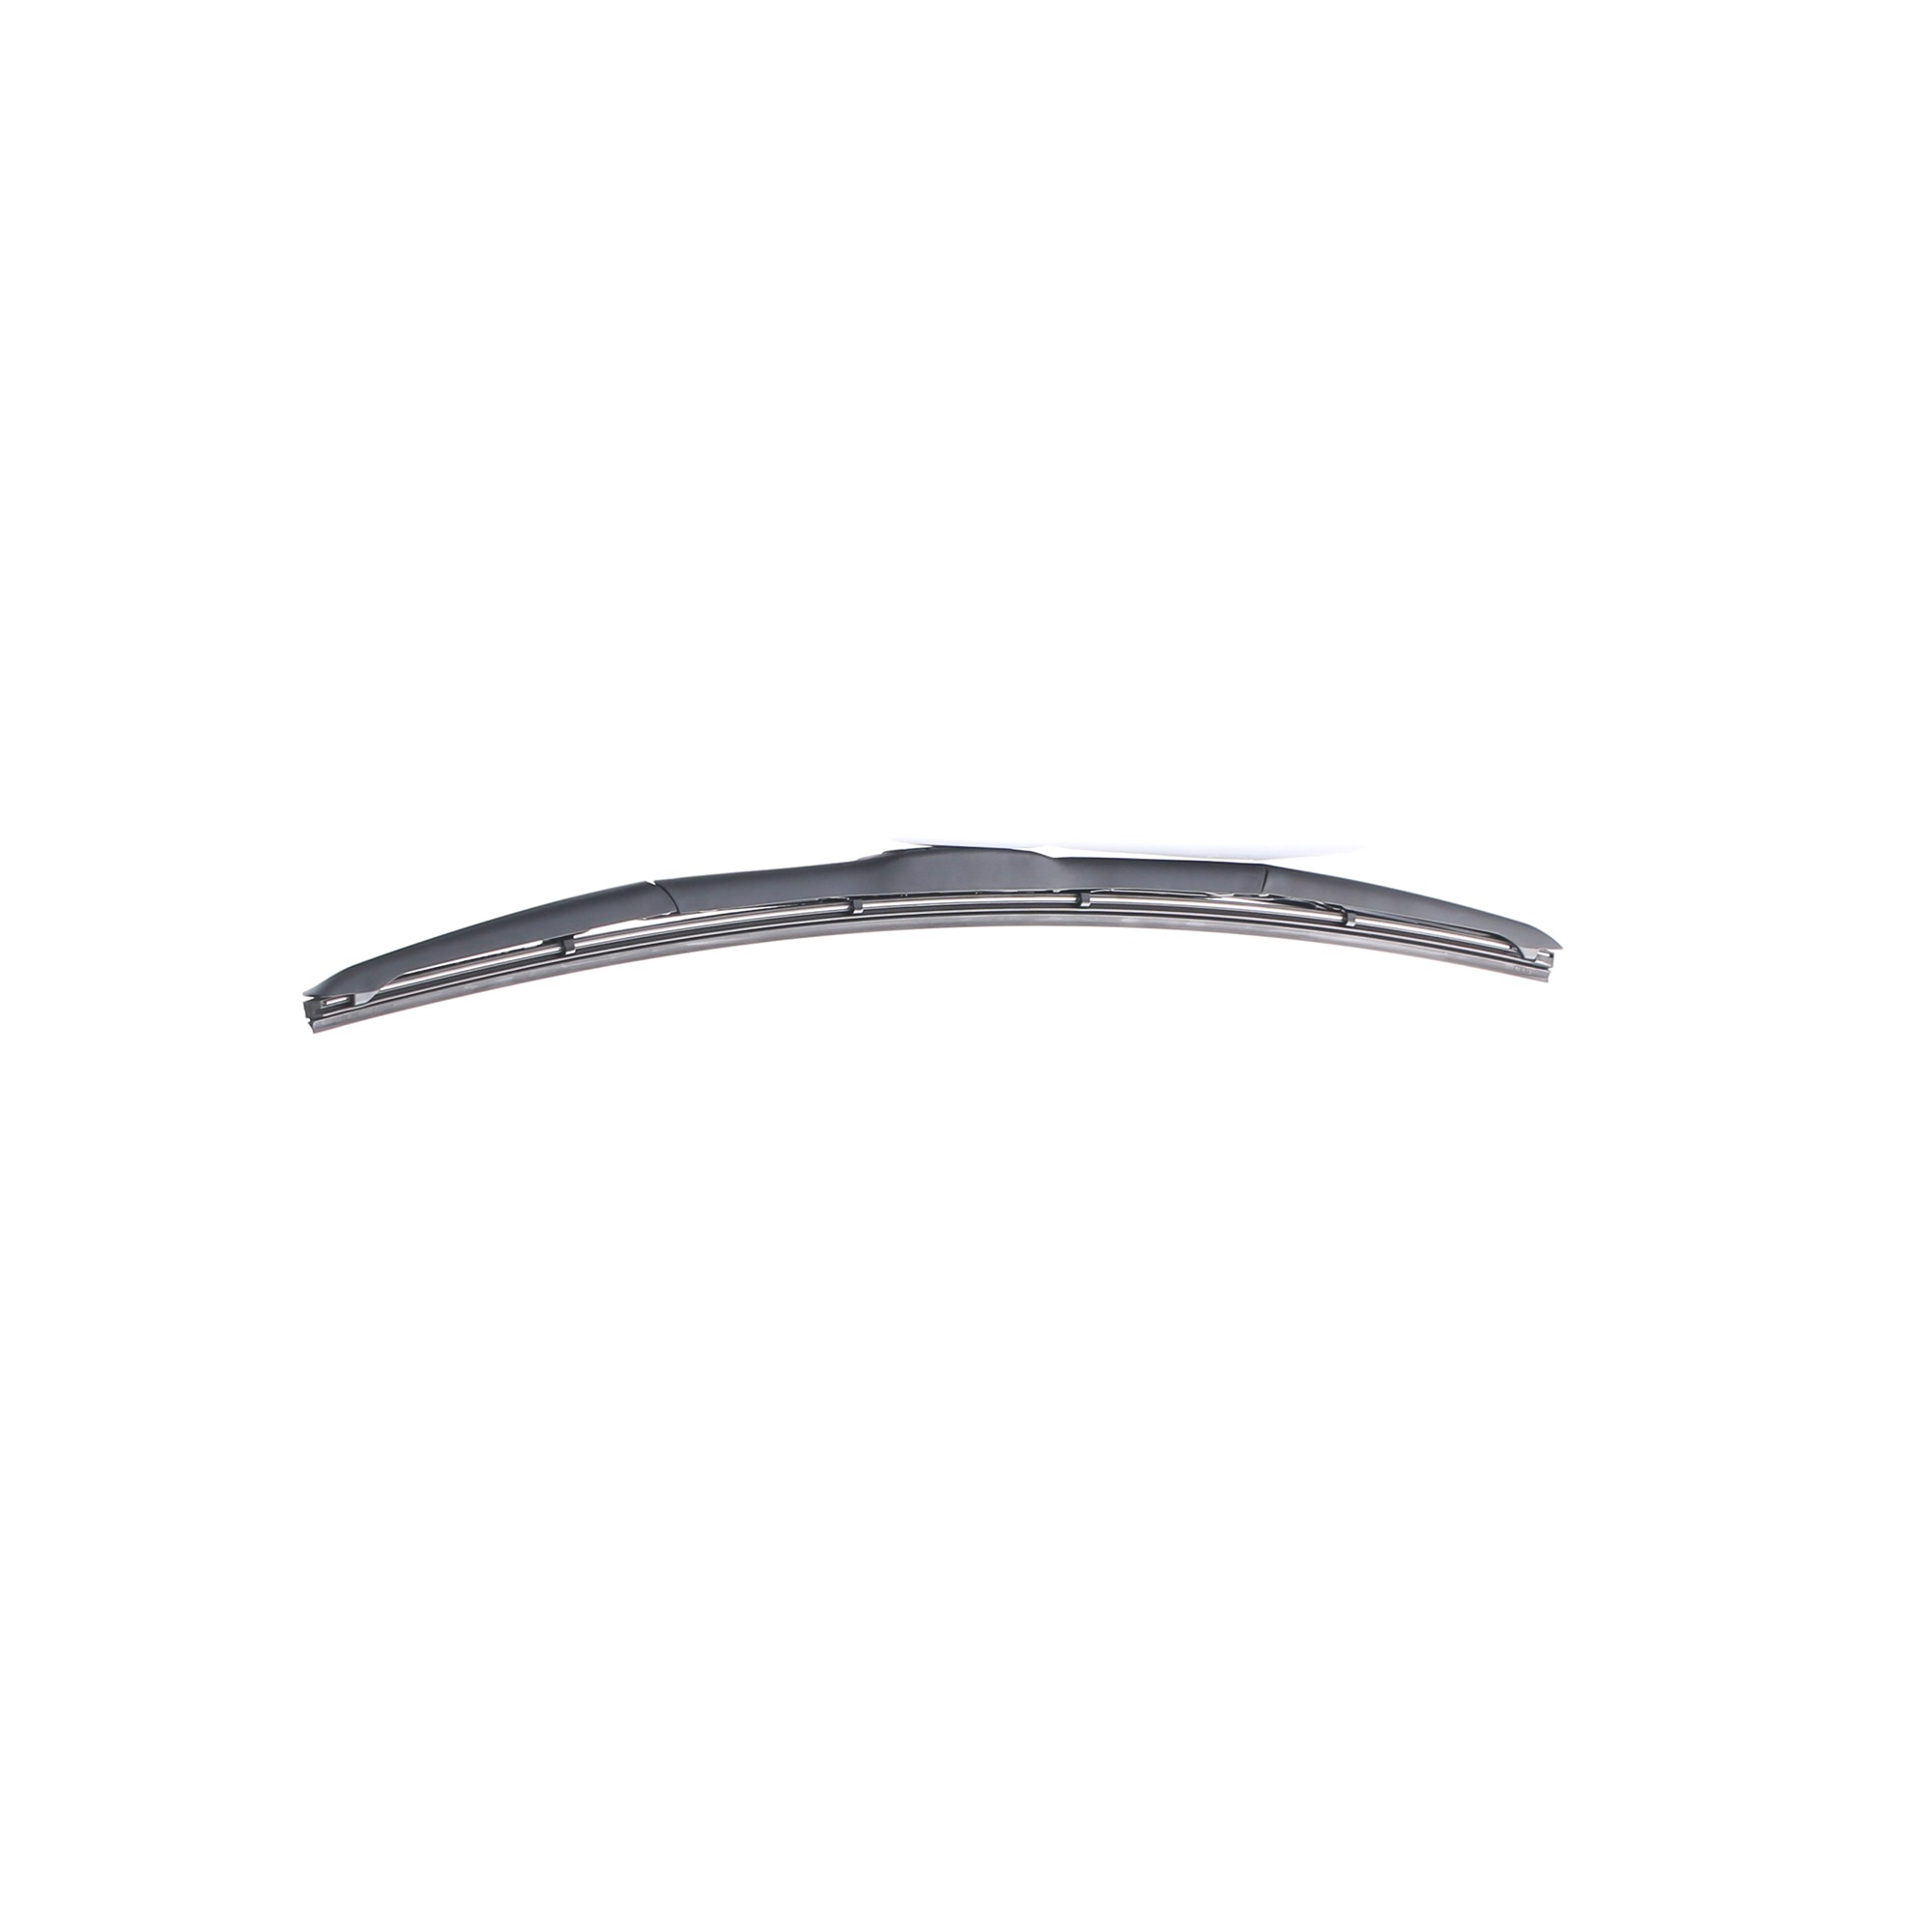 Buy Wiper Blade DENSO DUR-060R - Windscreen cleaning system parts online